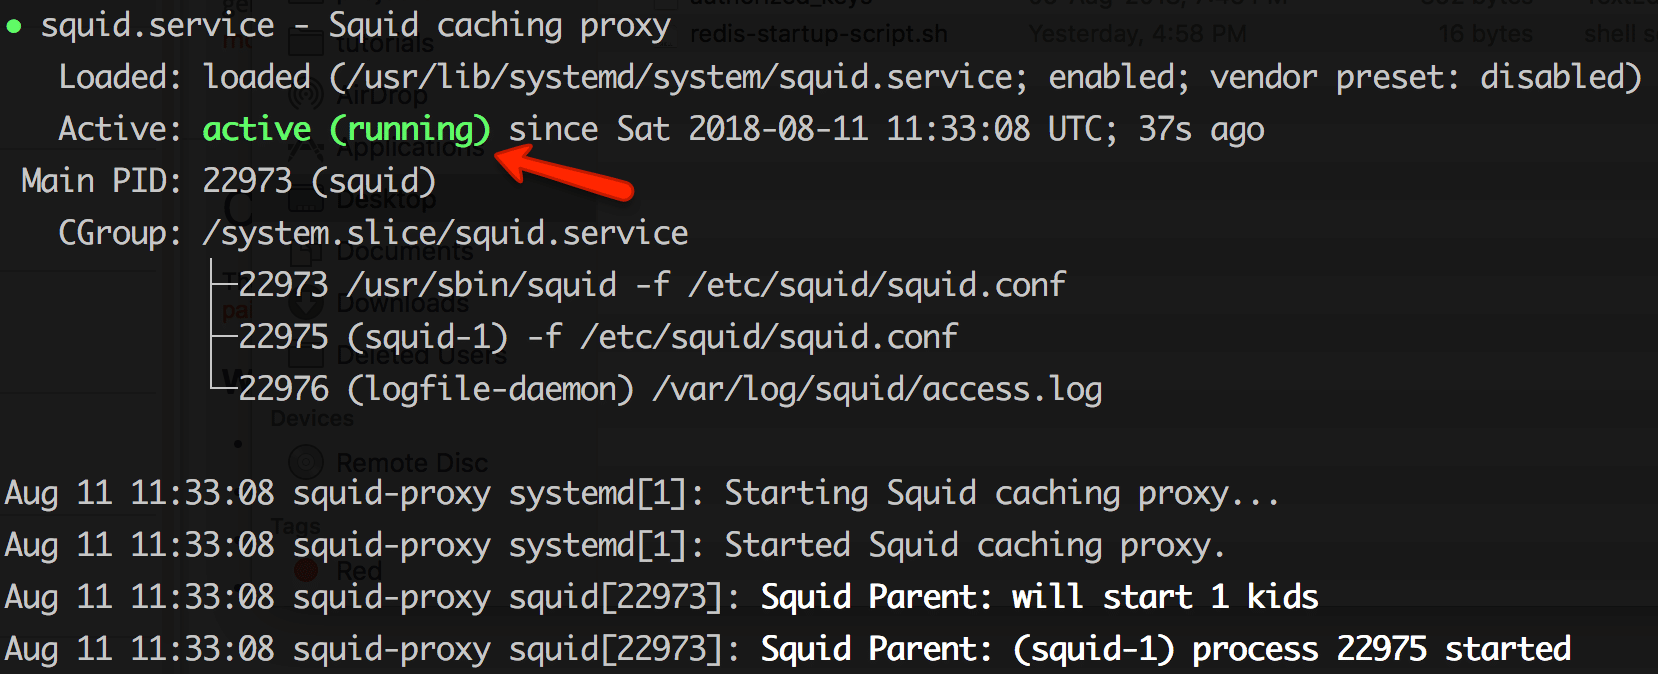 tag lustre suspendere How To Setup And Configure A Proxy Server - Squid Proxy Setup And  Configuration